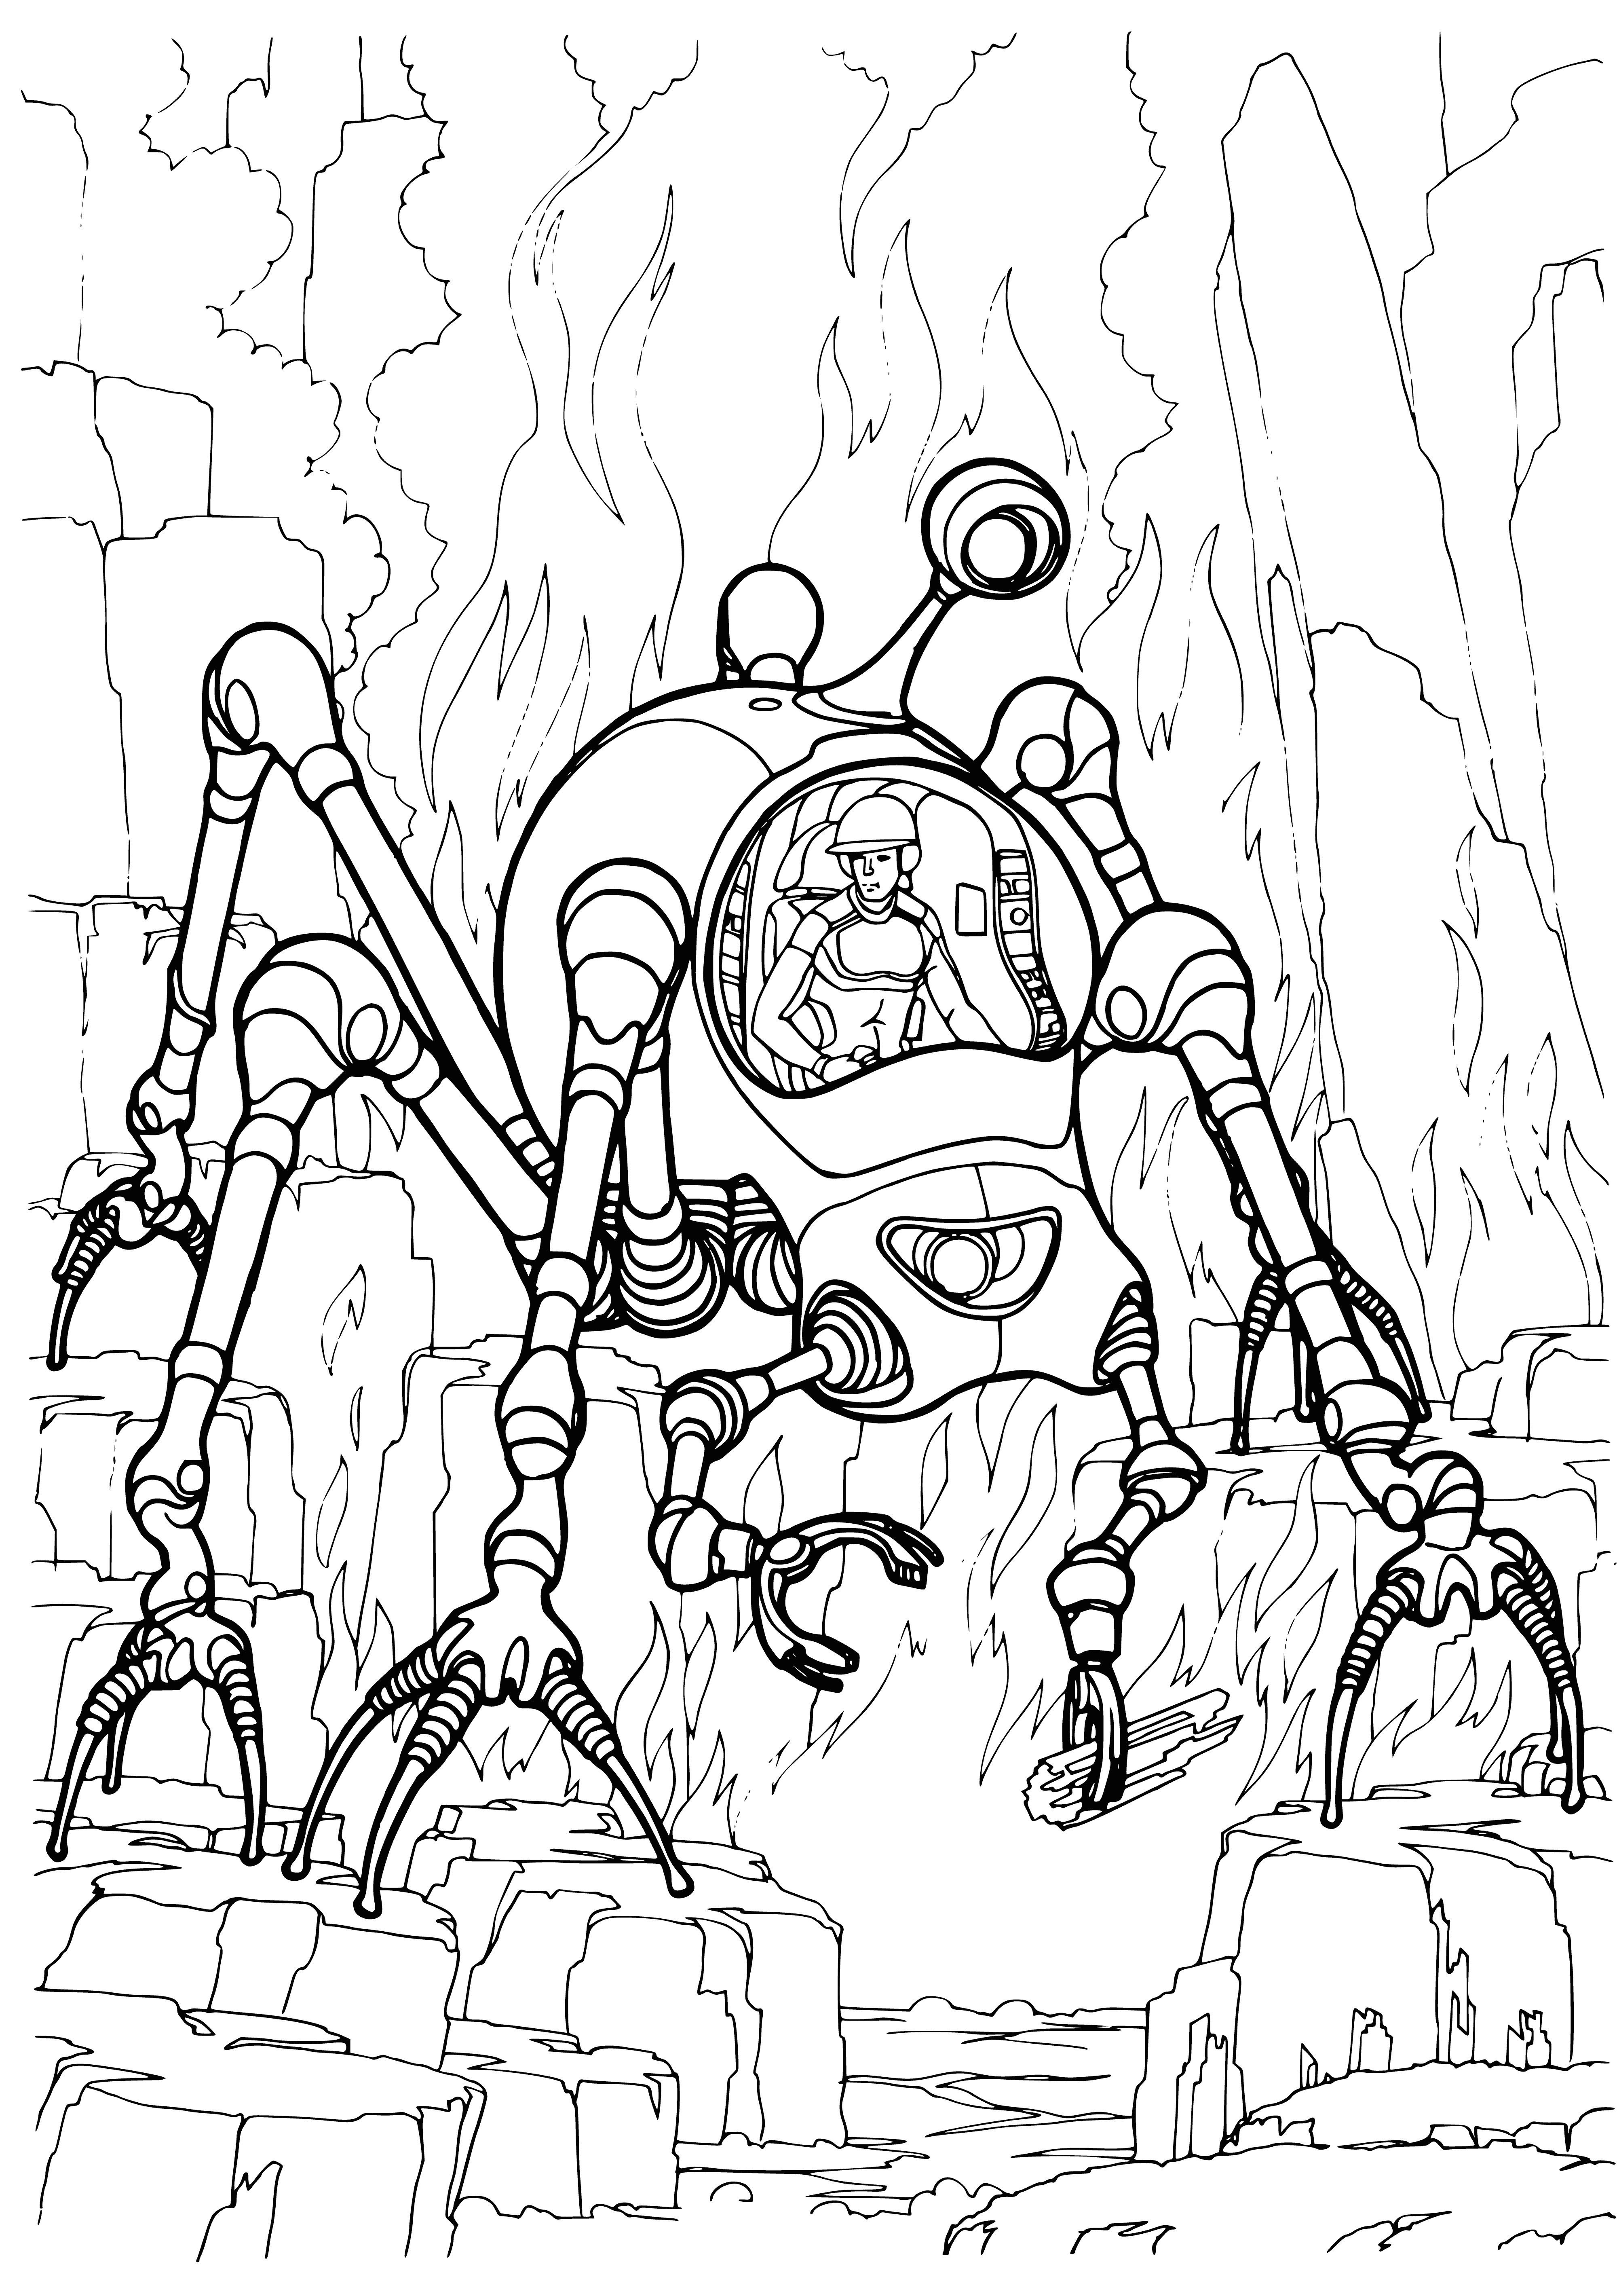 coloring page: Spider made from car climbs wall. Red & black, 8 legs.